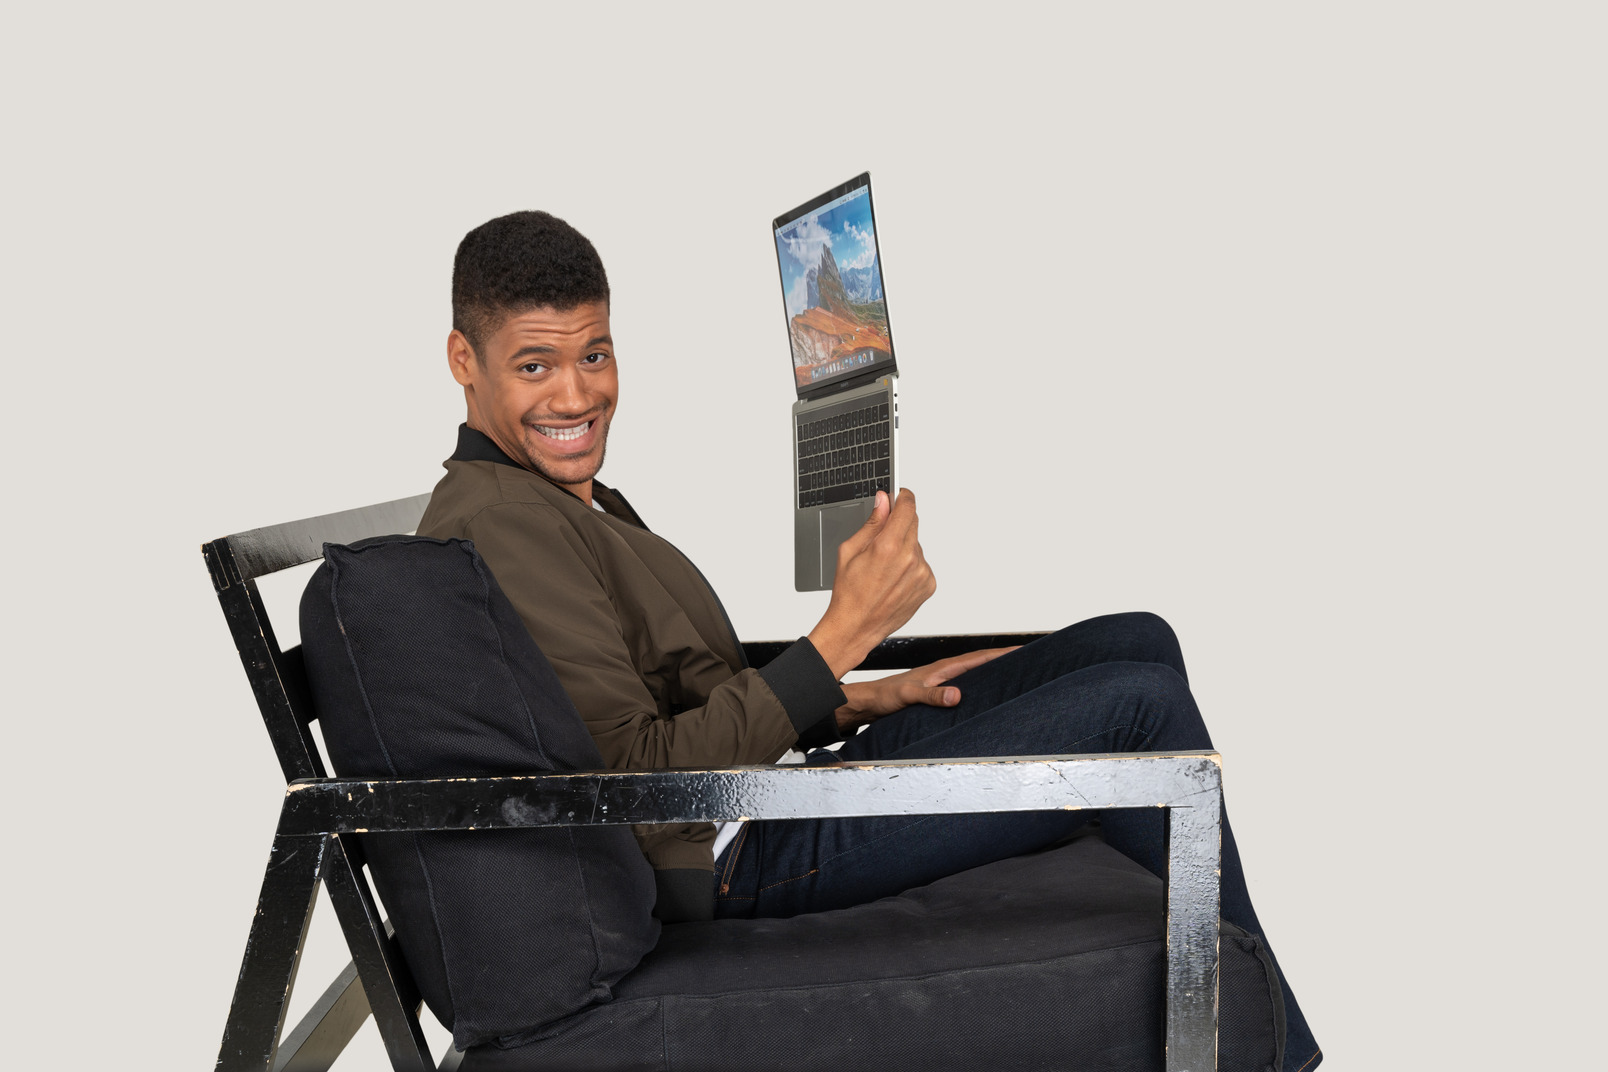 Side view of young man sitting on a sofa and holding a laptop